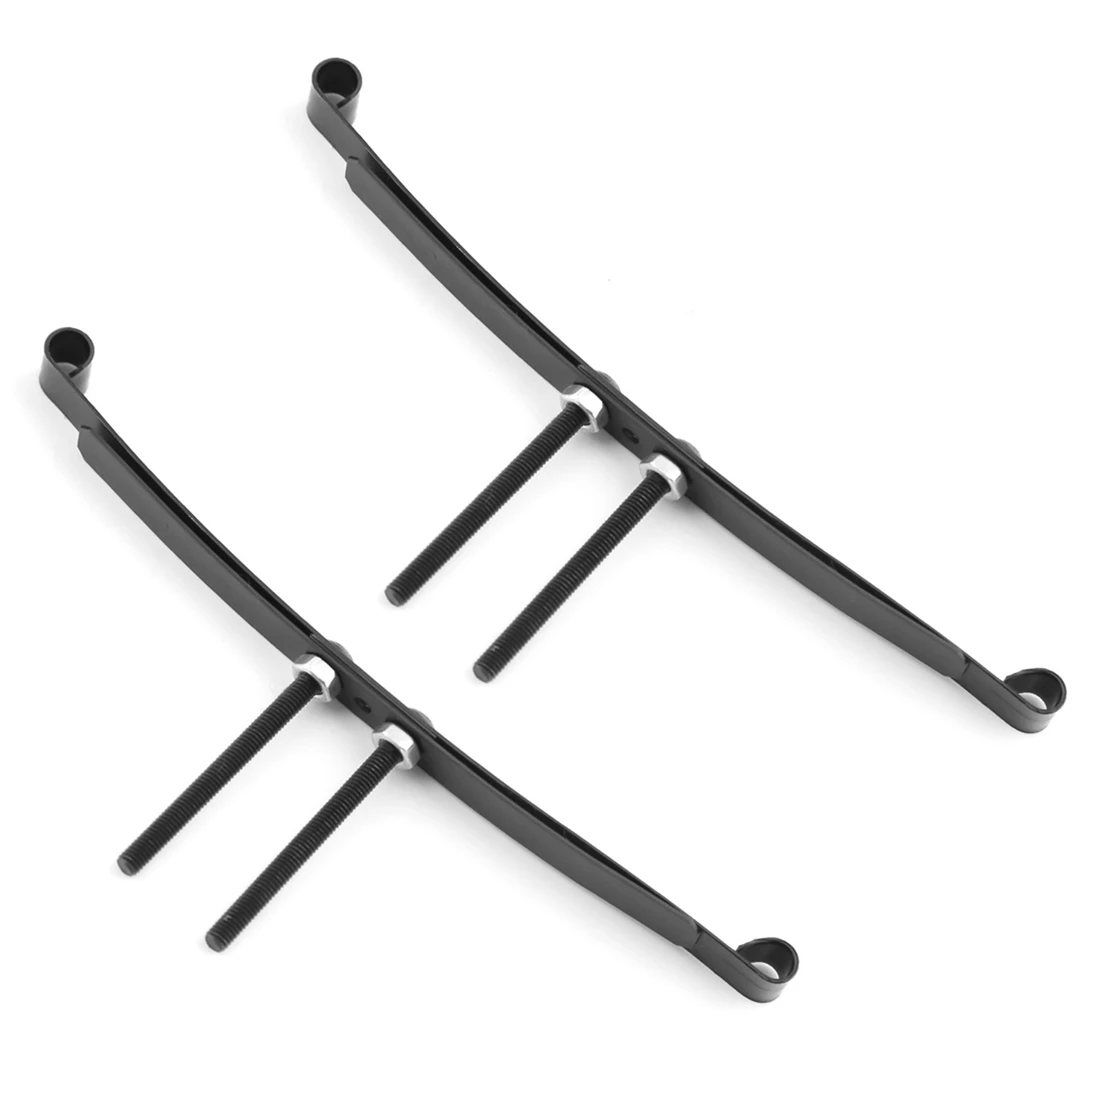 

2 set Steel Leaf Springs for 1/14 Tamiya RC Tractor Trailer Truck Model Car Upgrade Parts Spare Accessories, A